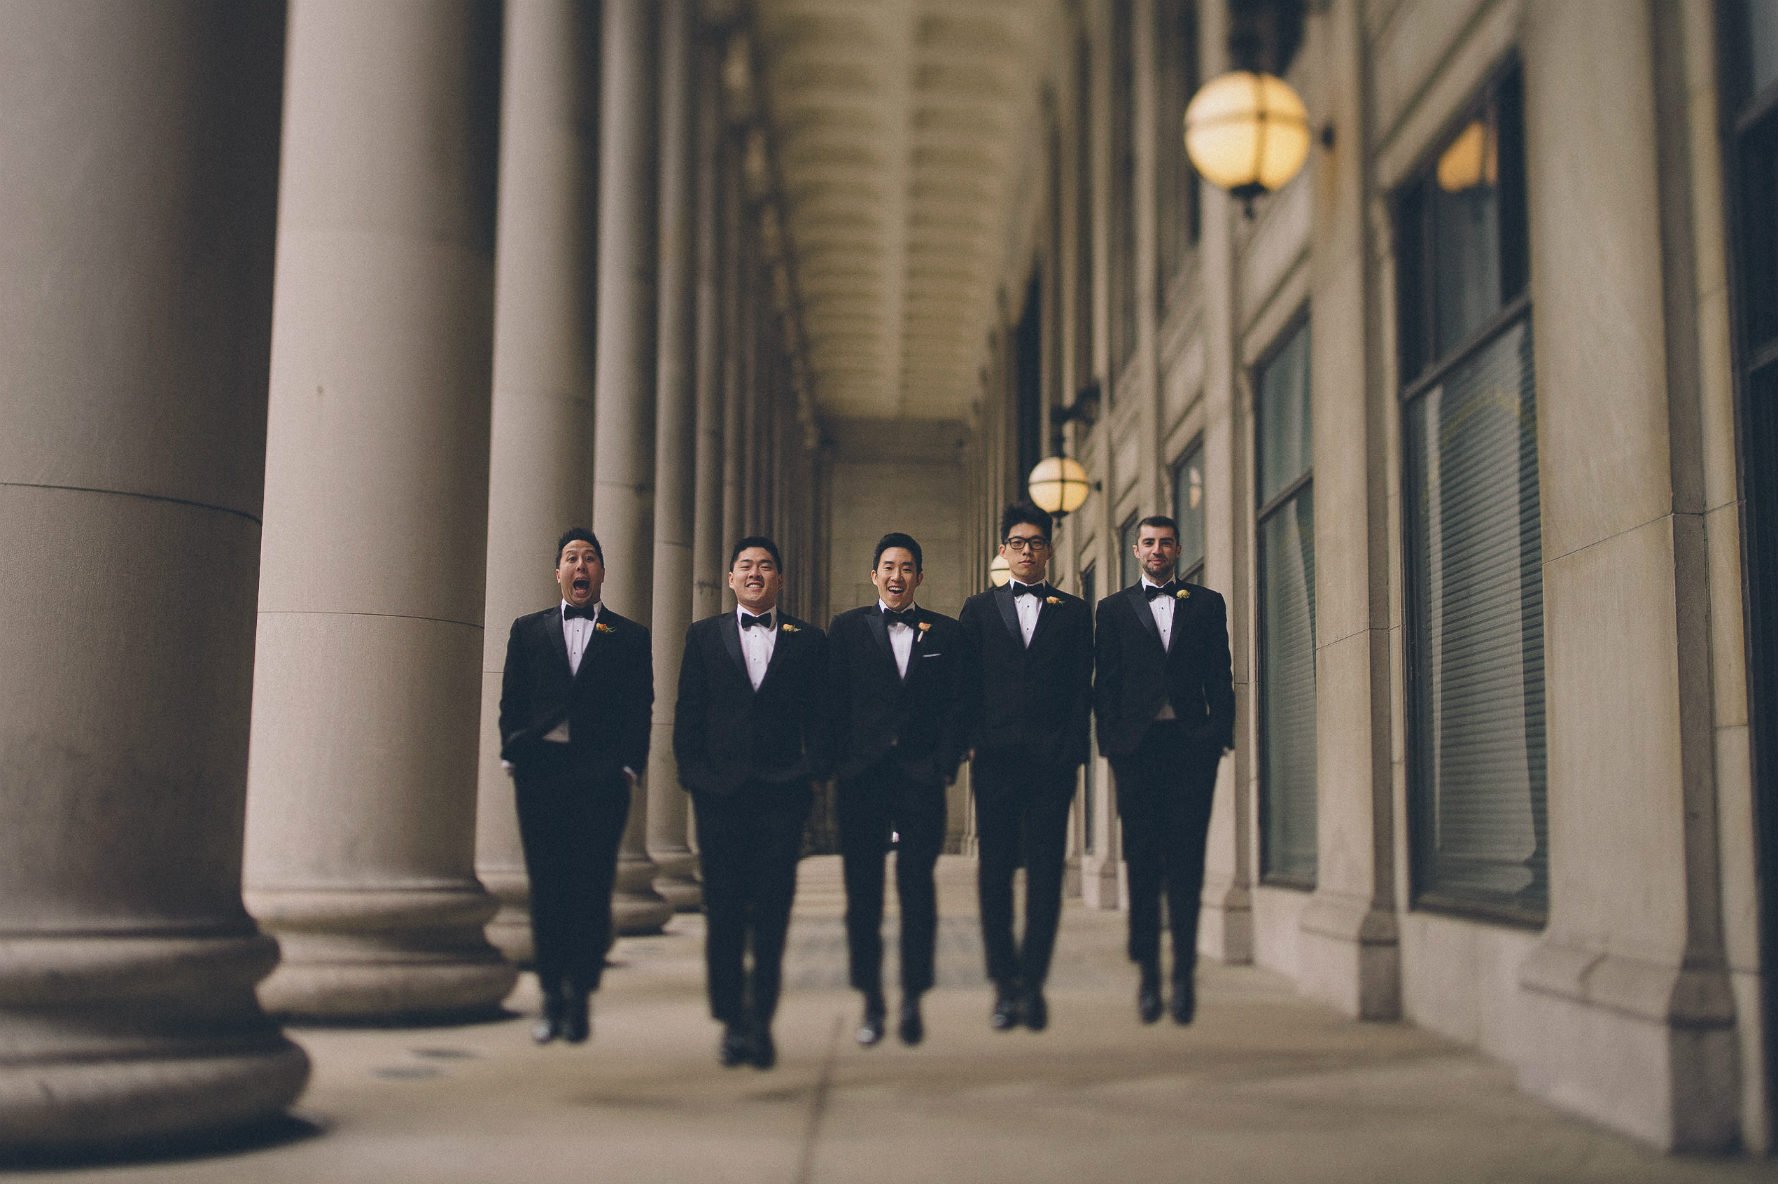 26.-Rookery-Wedding.-This-is-Feeling-Photography.-Sweetchic-Events.-Groomsmen.-Jumping.jpg